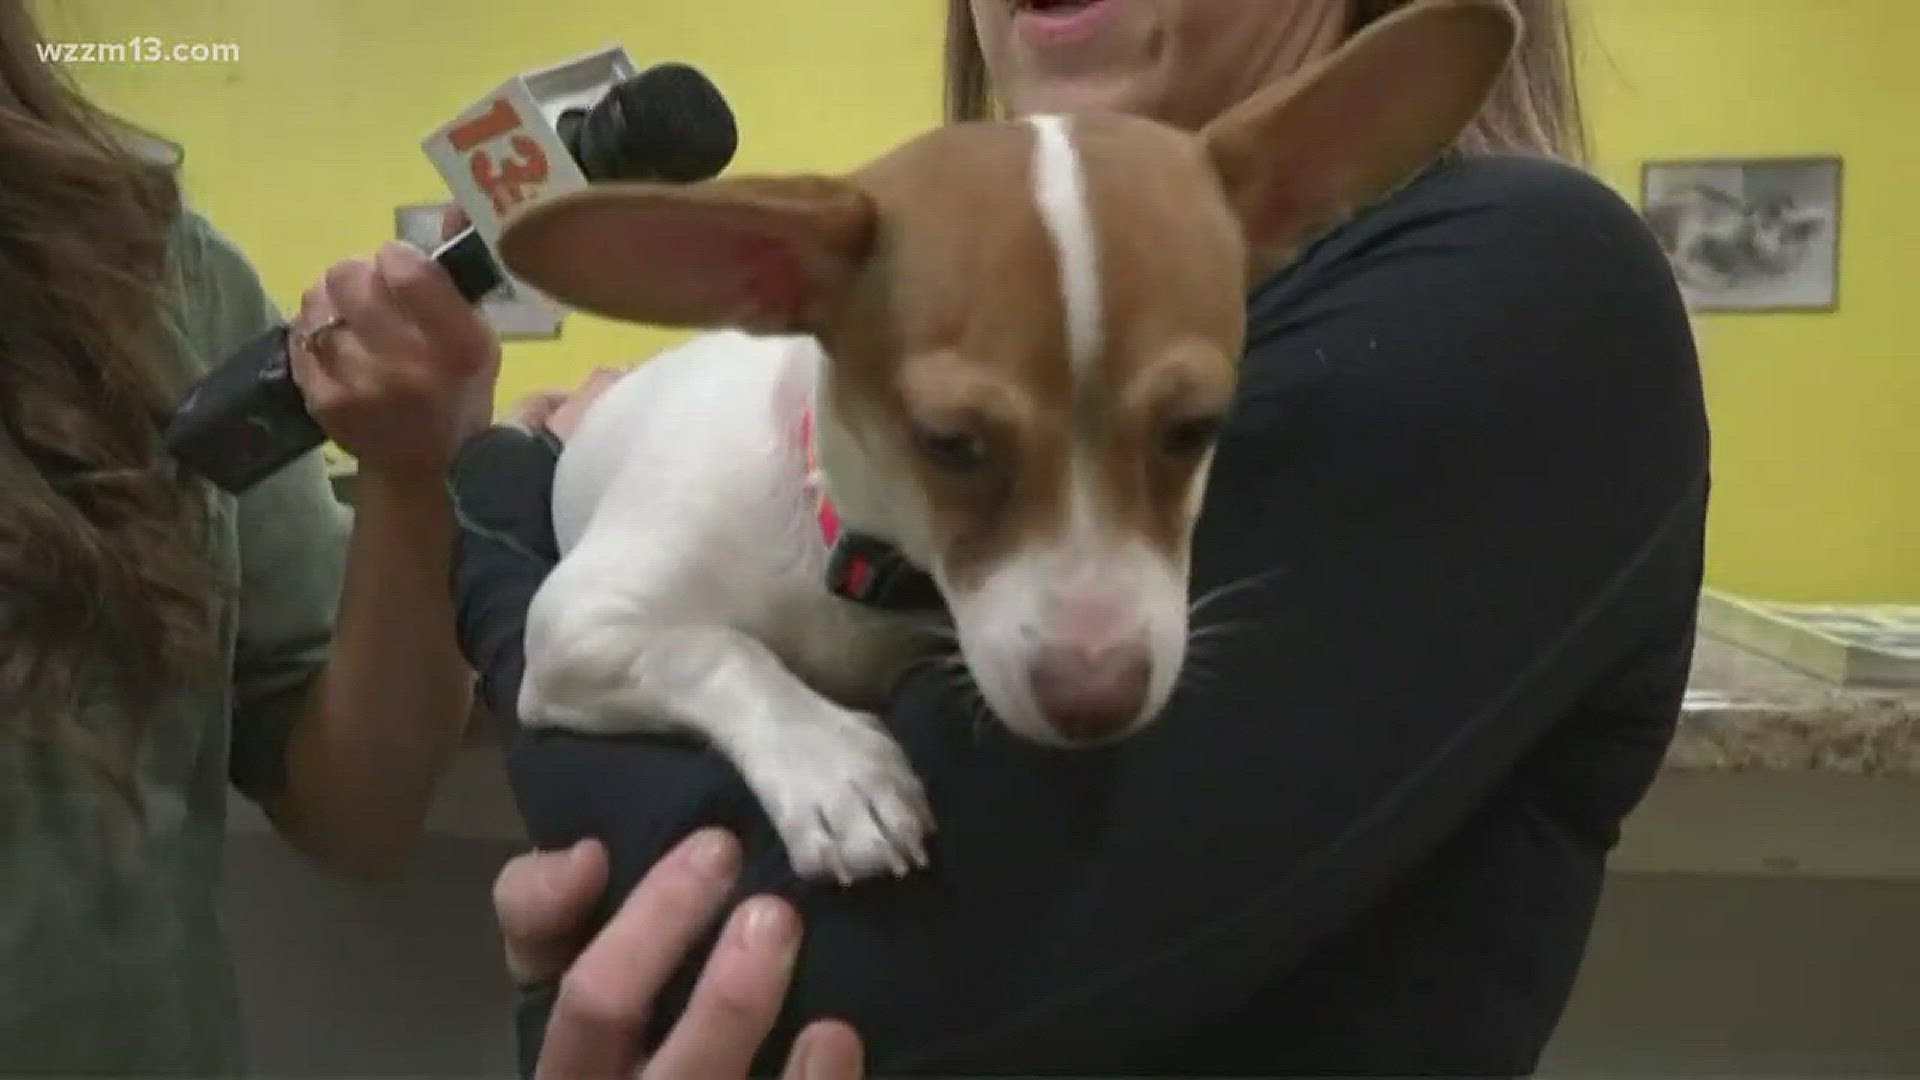 Pound Buddies in Muskegon celebrates National Puppy Day, part 1